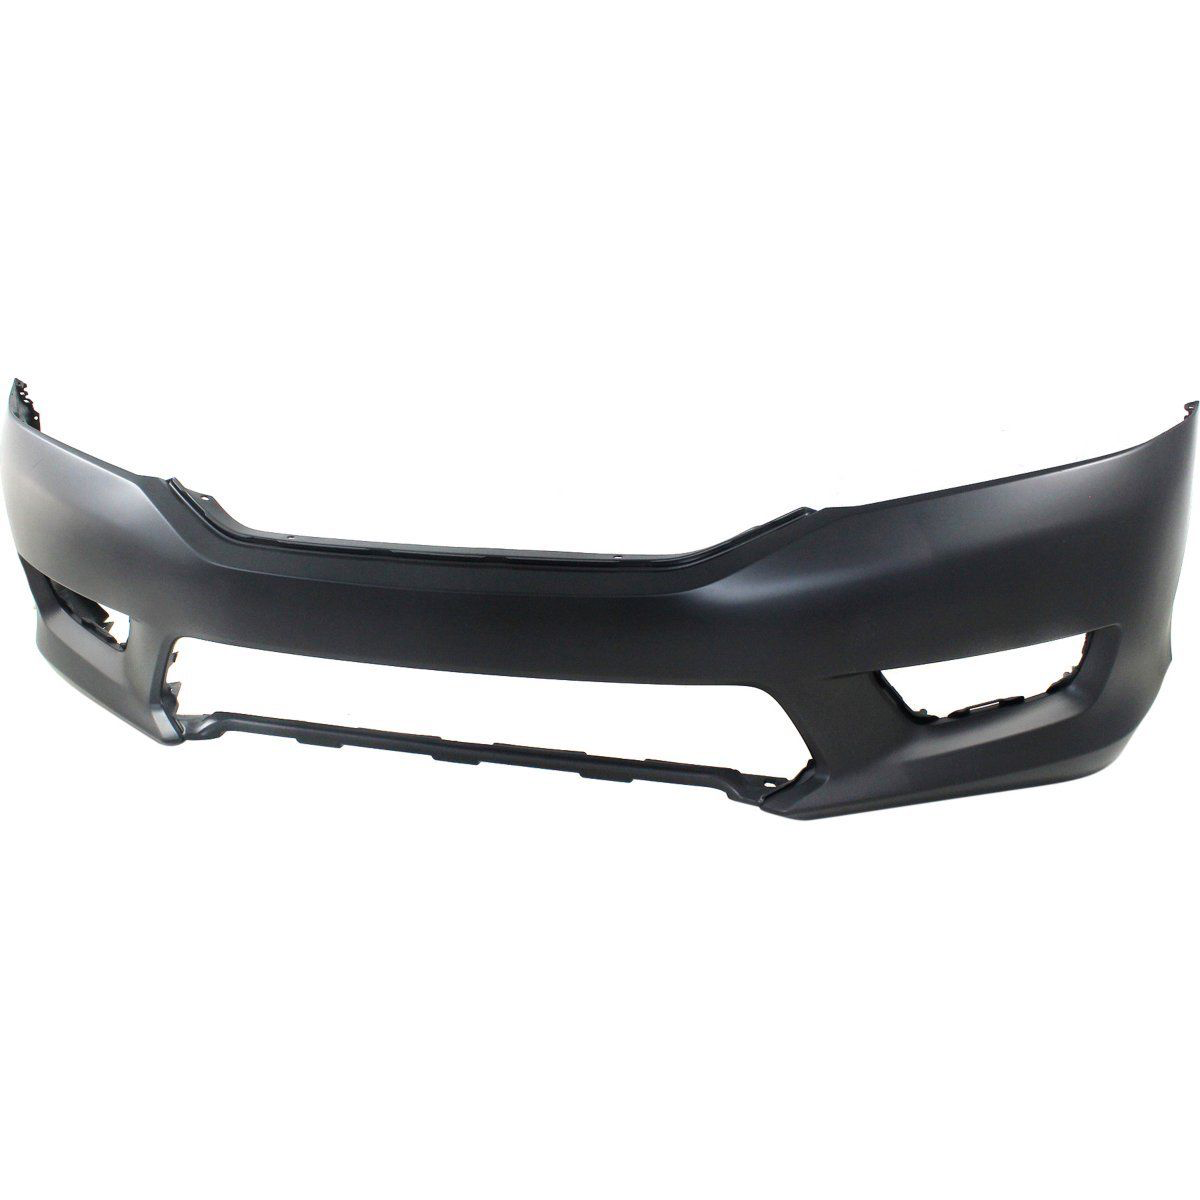 2013-2015 HONDA ACCORD Front Bumper Cover Sedan Painted to Match